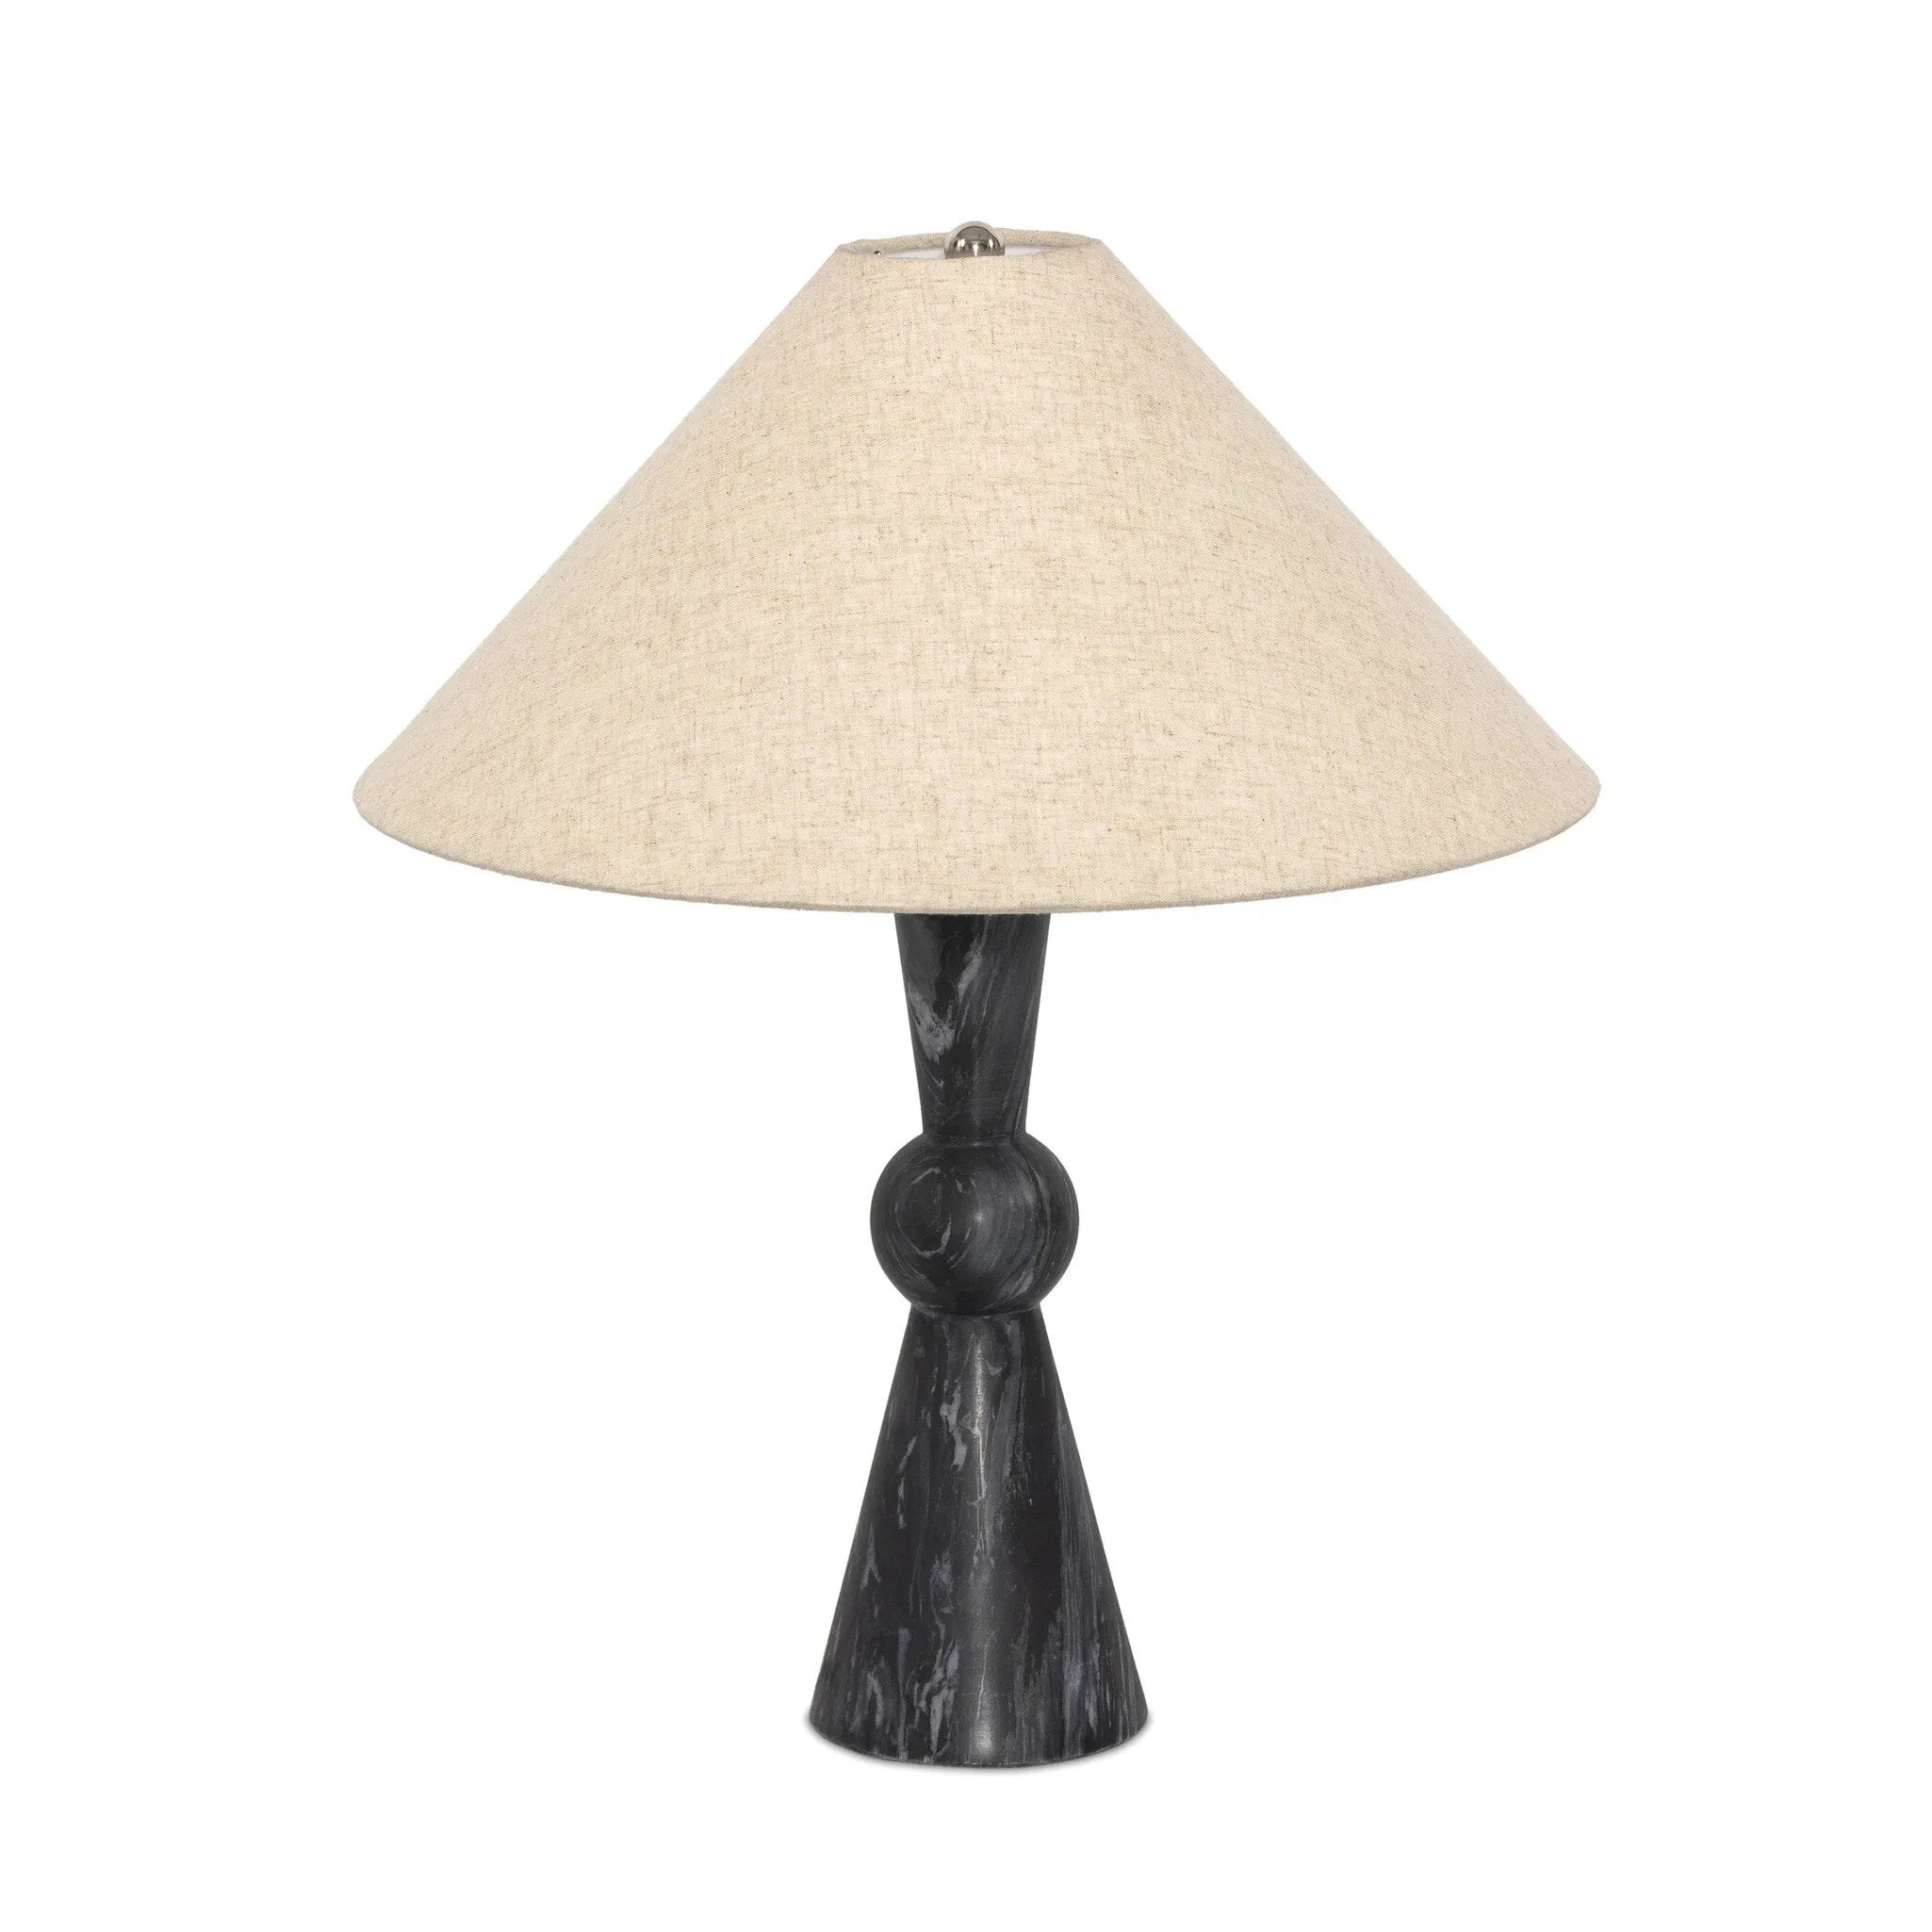 Polished forms define this sculptural table lamp, featuring a base of black Italian marble with distinctive white veining and a tapered flax linen shade.Collection: Ashe Amethyst Home provides interior design, new home construction design consulting, vintage area rugs, and lighting in the Los Angeles metro area.